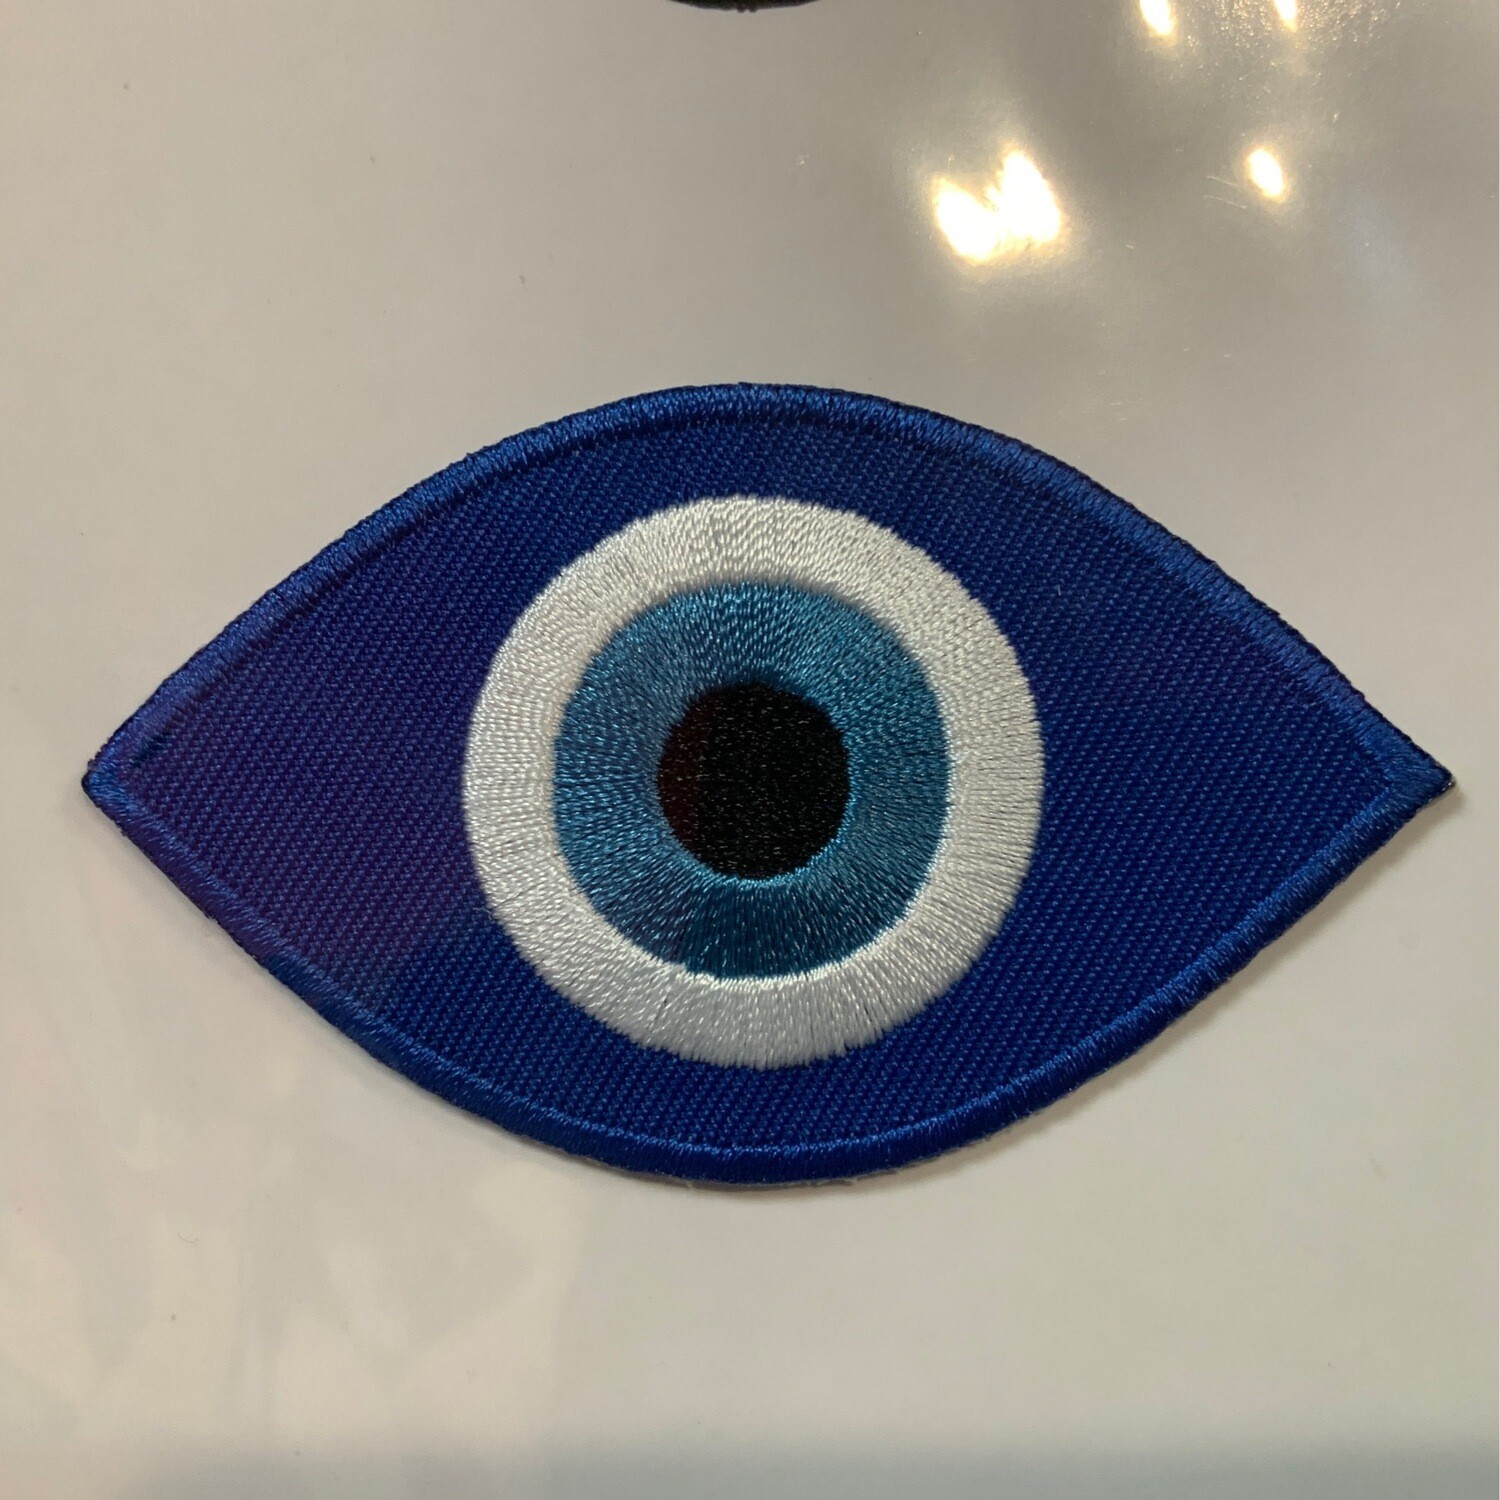 Evil Eye - Embroidered Patch from These Are Things